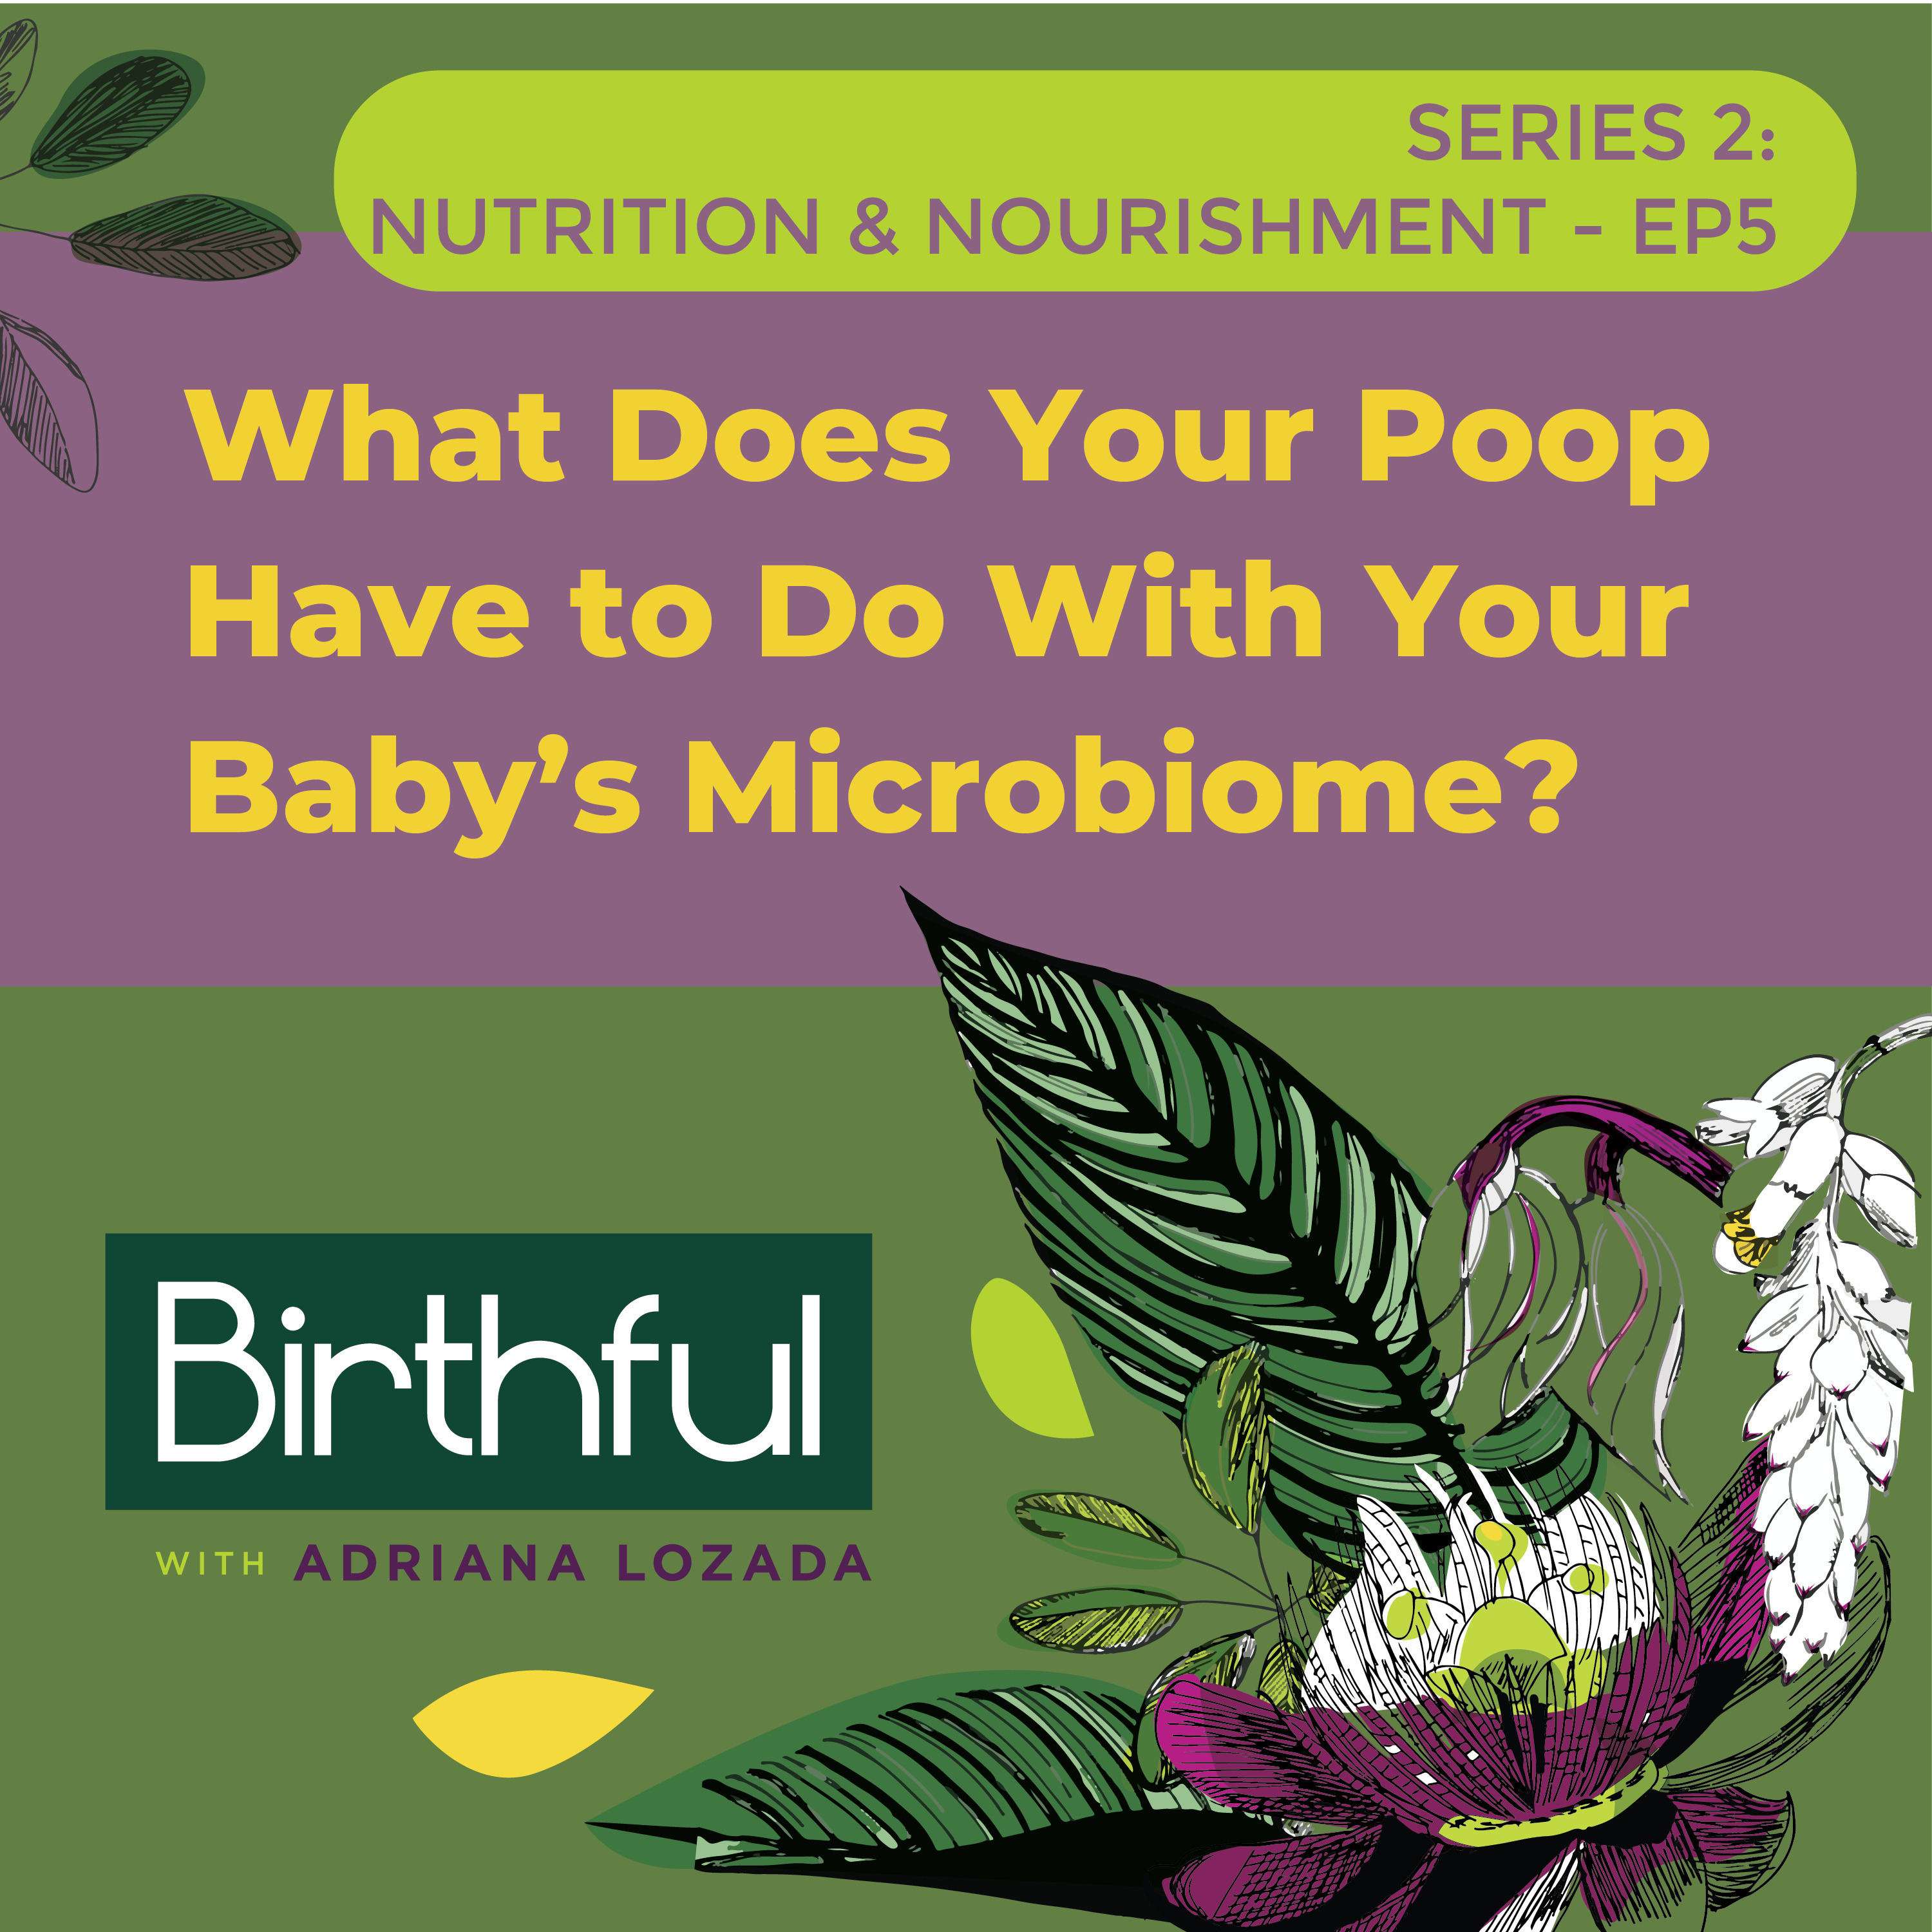 What Does Your Poop Have to Do With Your Baby’s Microbiome?